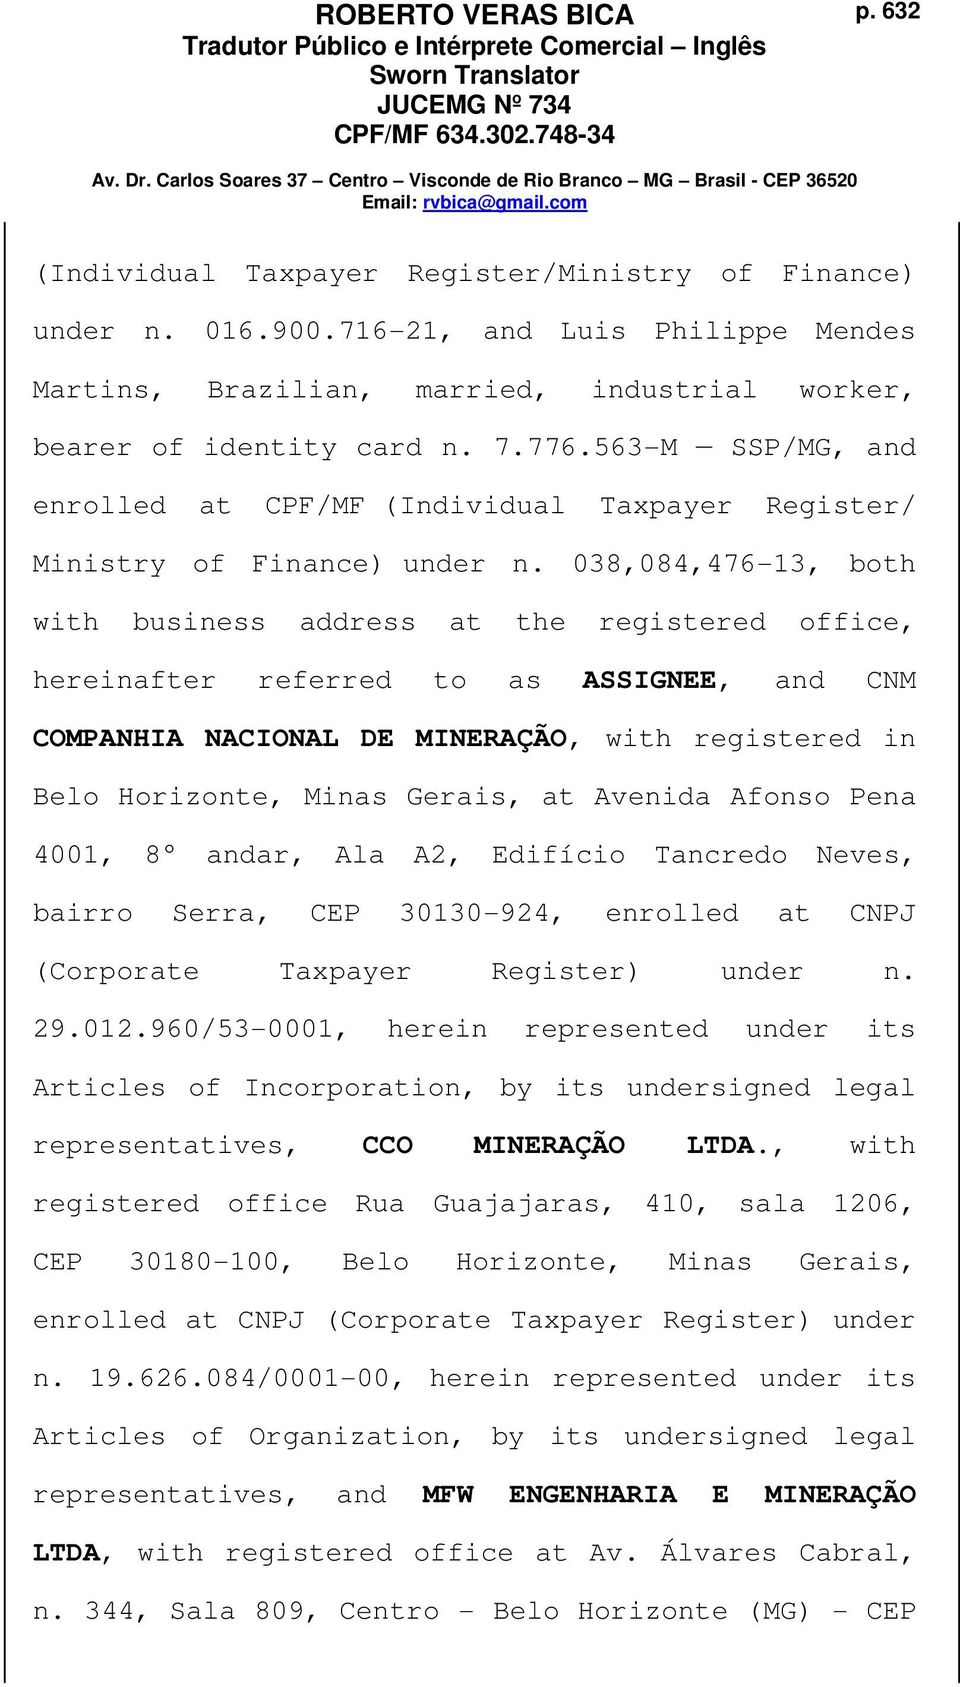 038,084,476-13, both with business address at the registered office, hereinafter referred to as ASSIGNEE, and CNM COMPANHIA NACIONAL DE MINERAÇÃO, with registered in Belo Horizonte, Minas Gerais, at